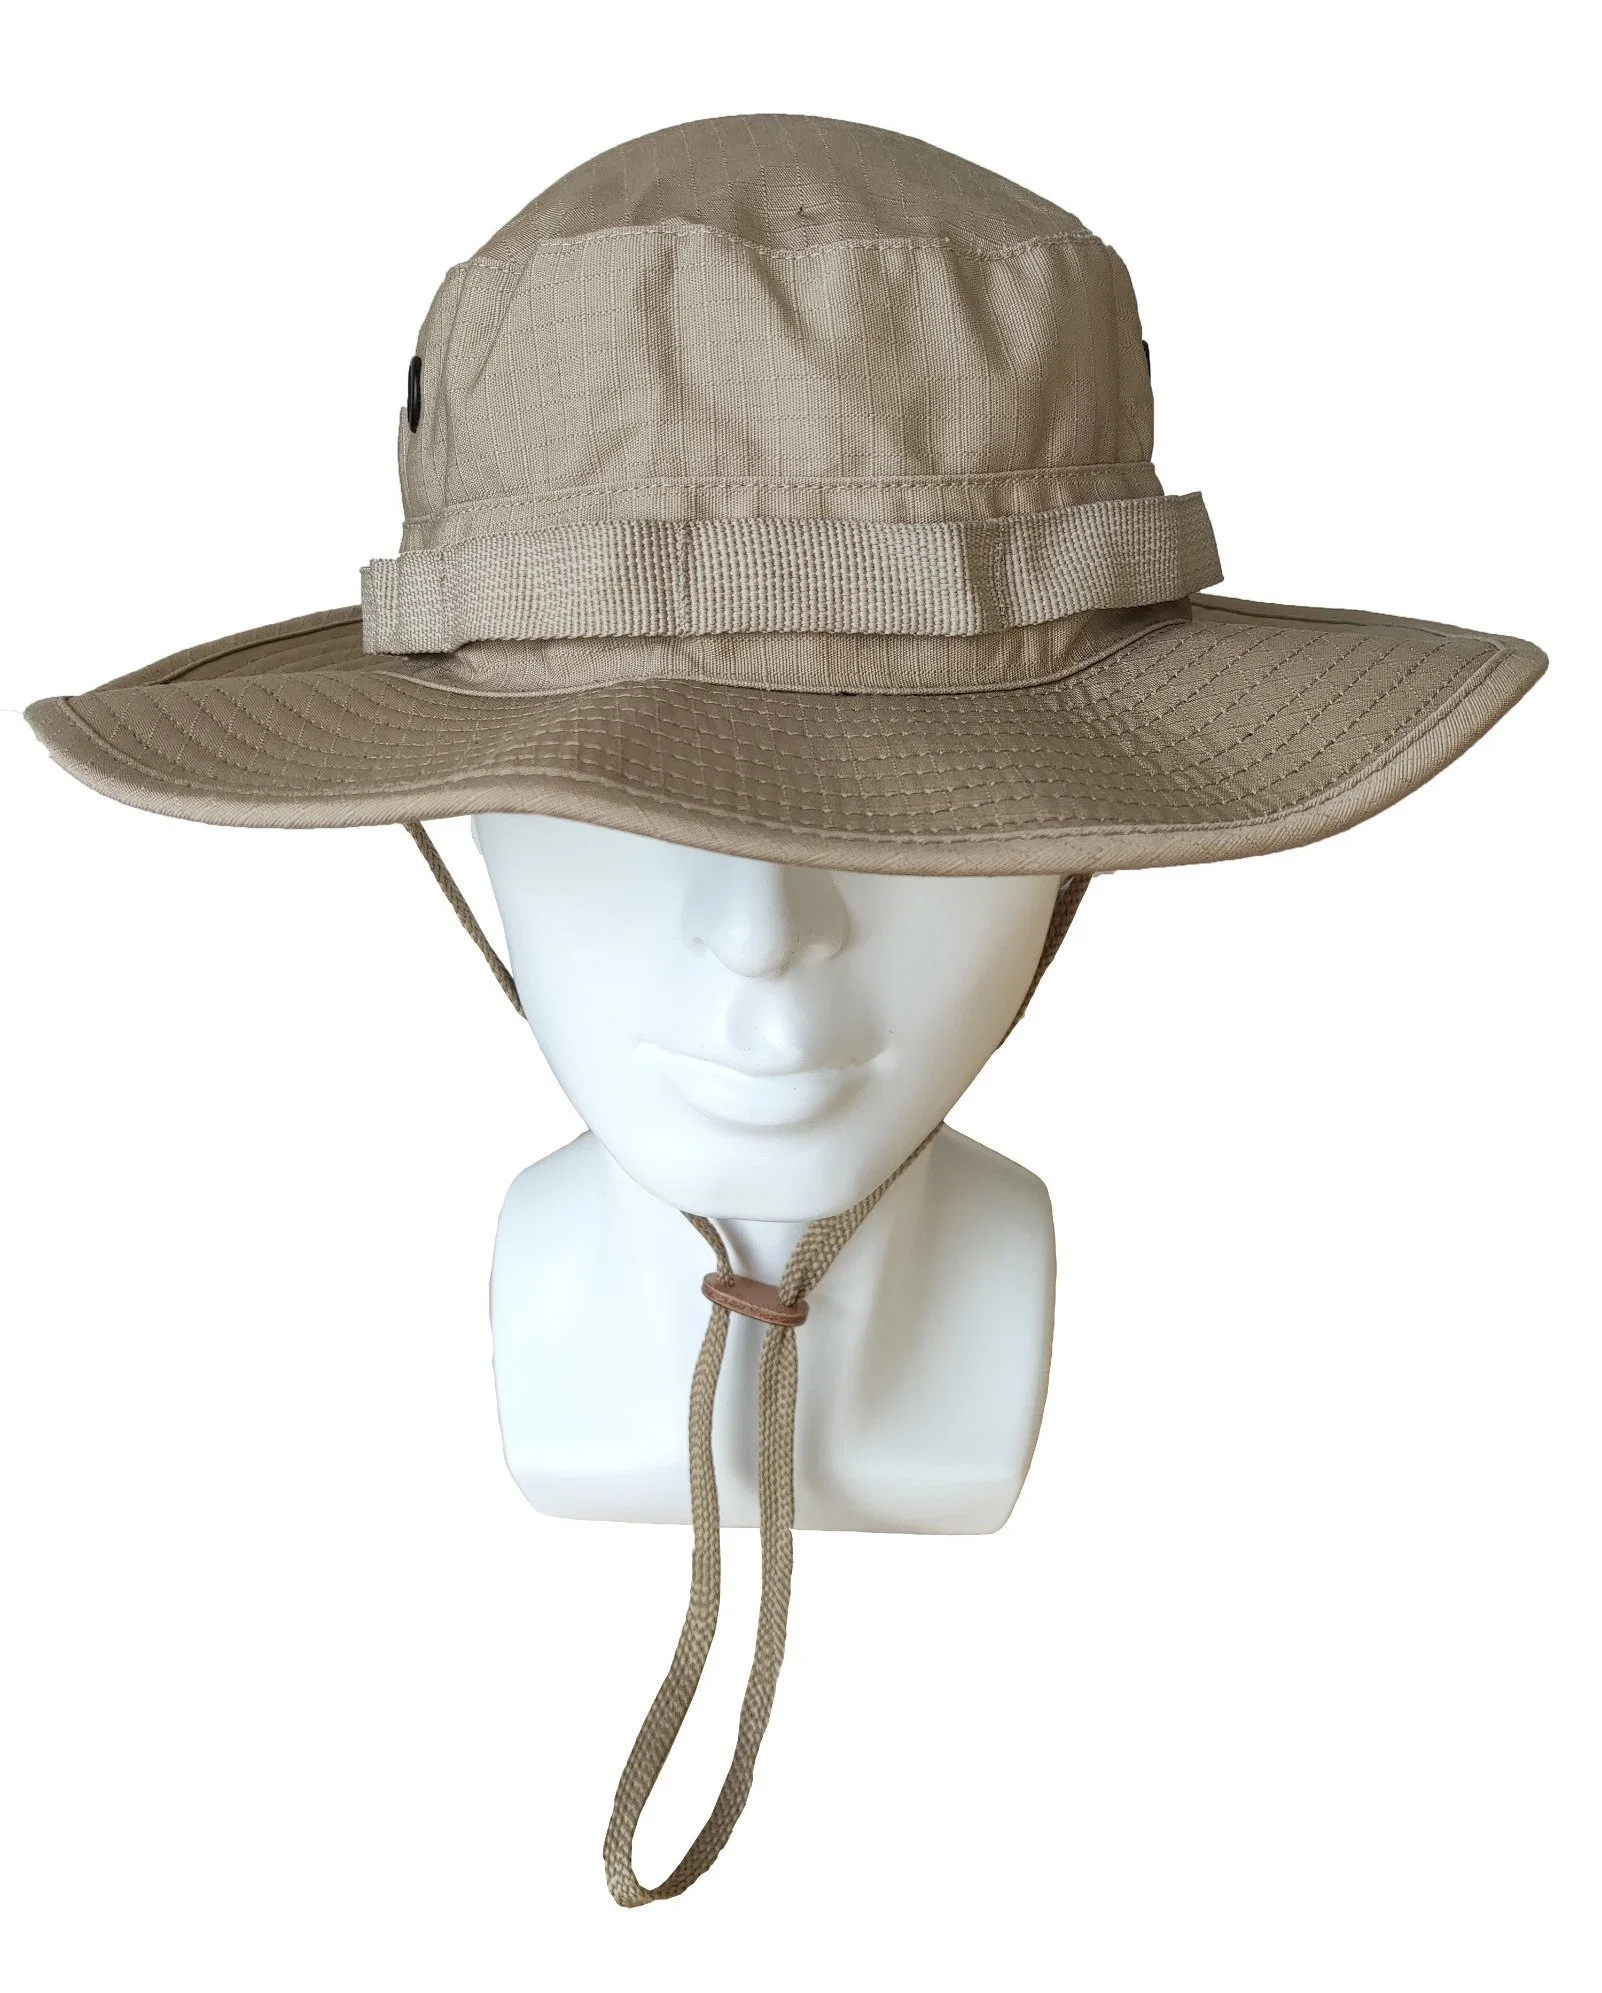 Bonnie Police Outdoor Rip-Stop Army Military Fishing Polyester Cotton Hat